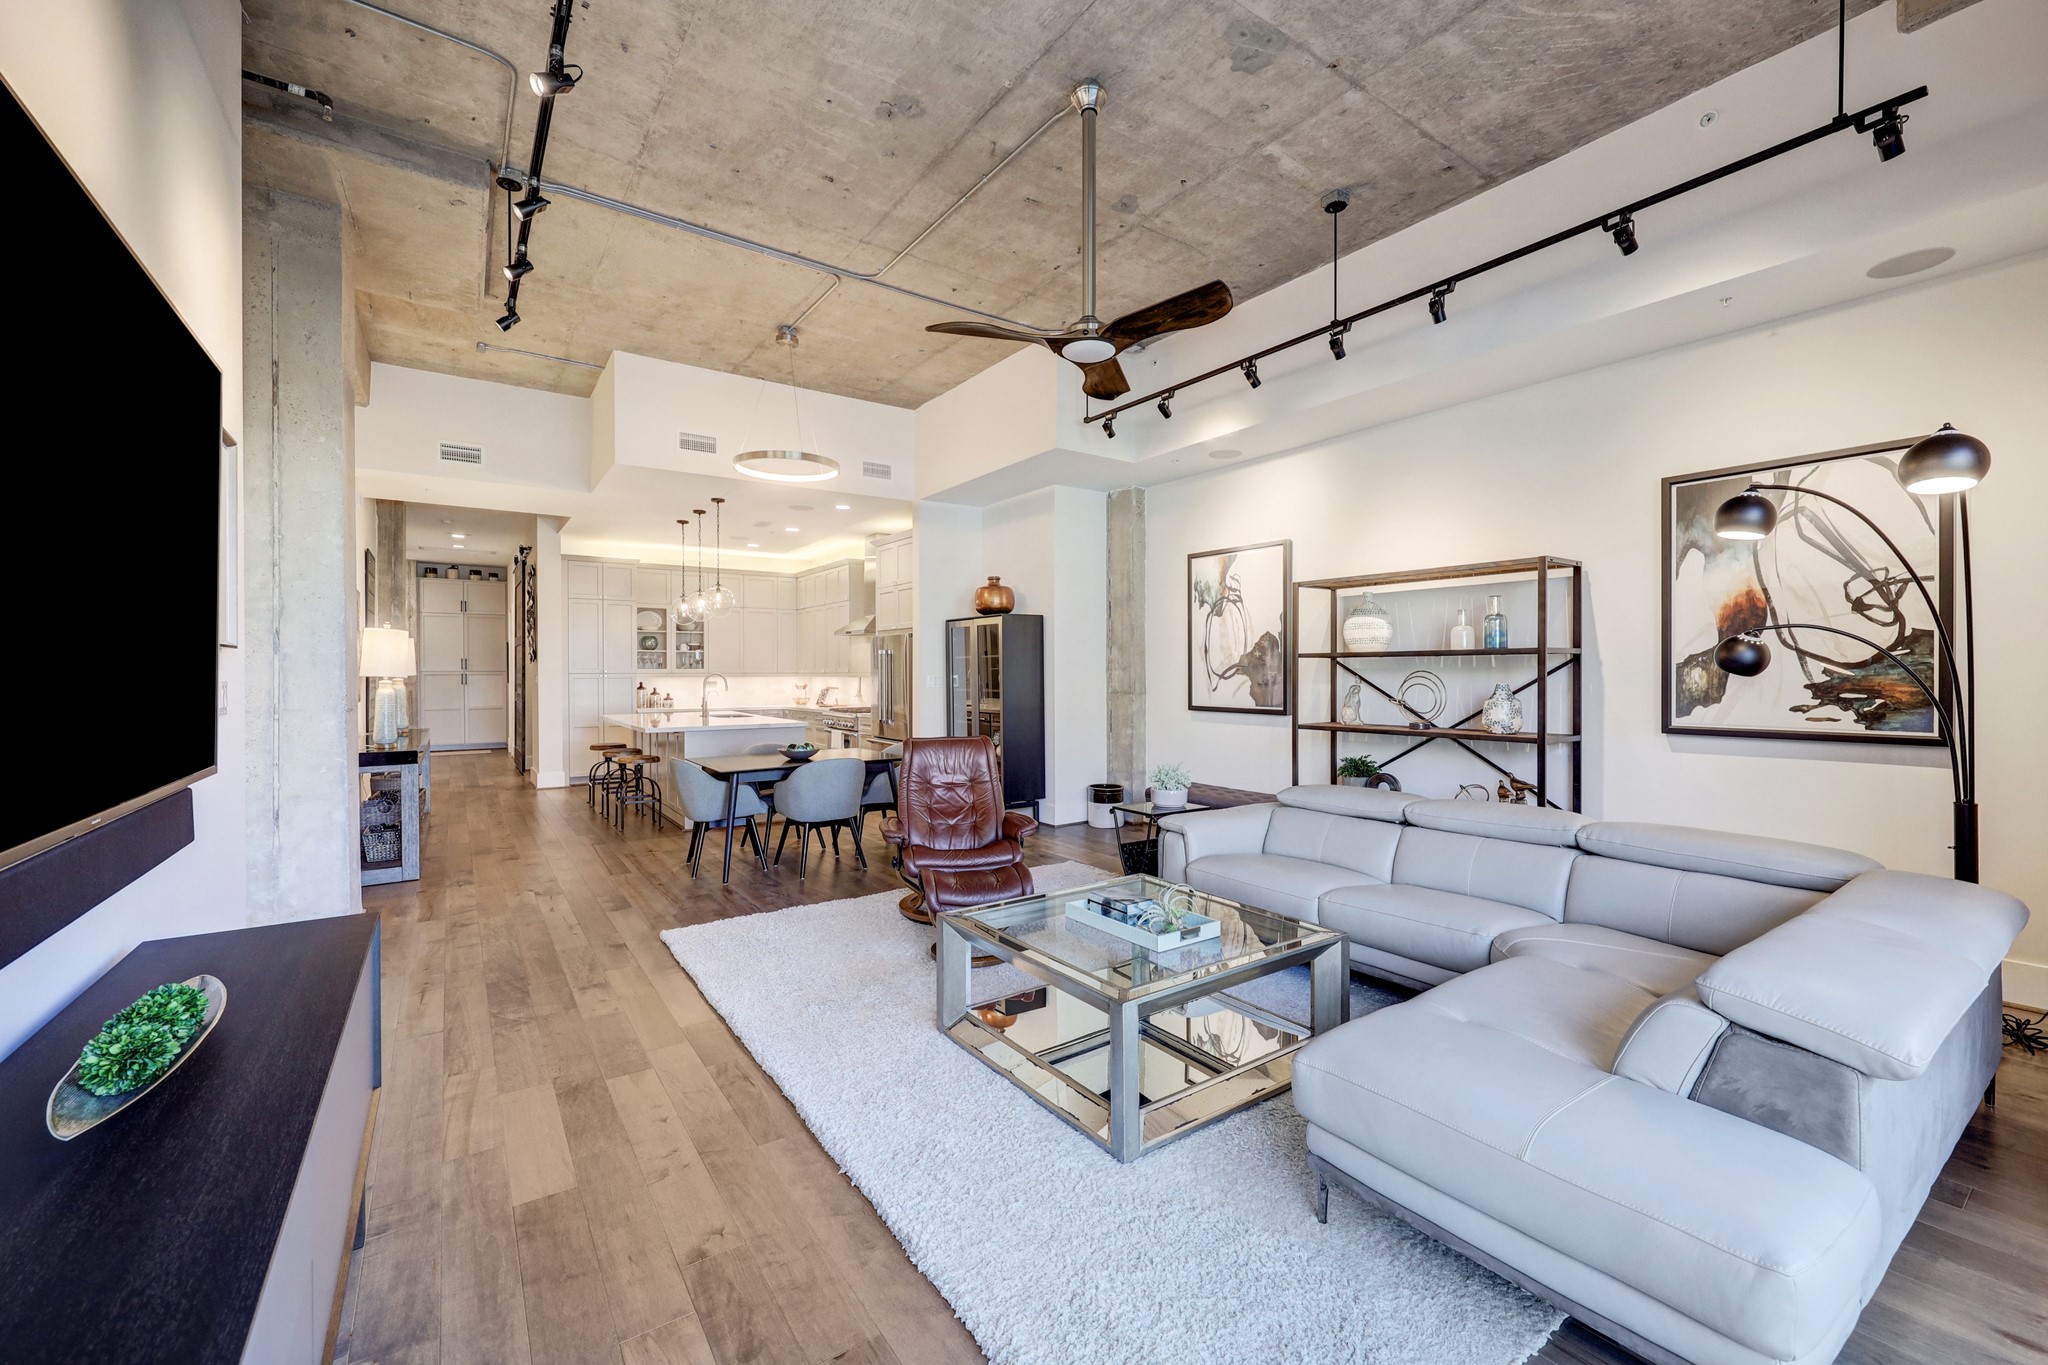 The building has a longstanding history in the Heights. The original Southwestern Bell building was preserved and revitalized into this luxury loft building with individual condos to live on for the next generations to enjoy.